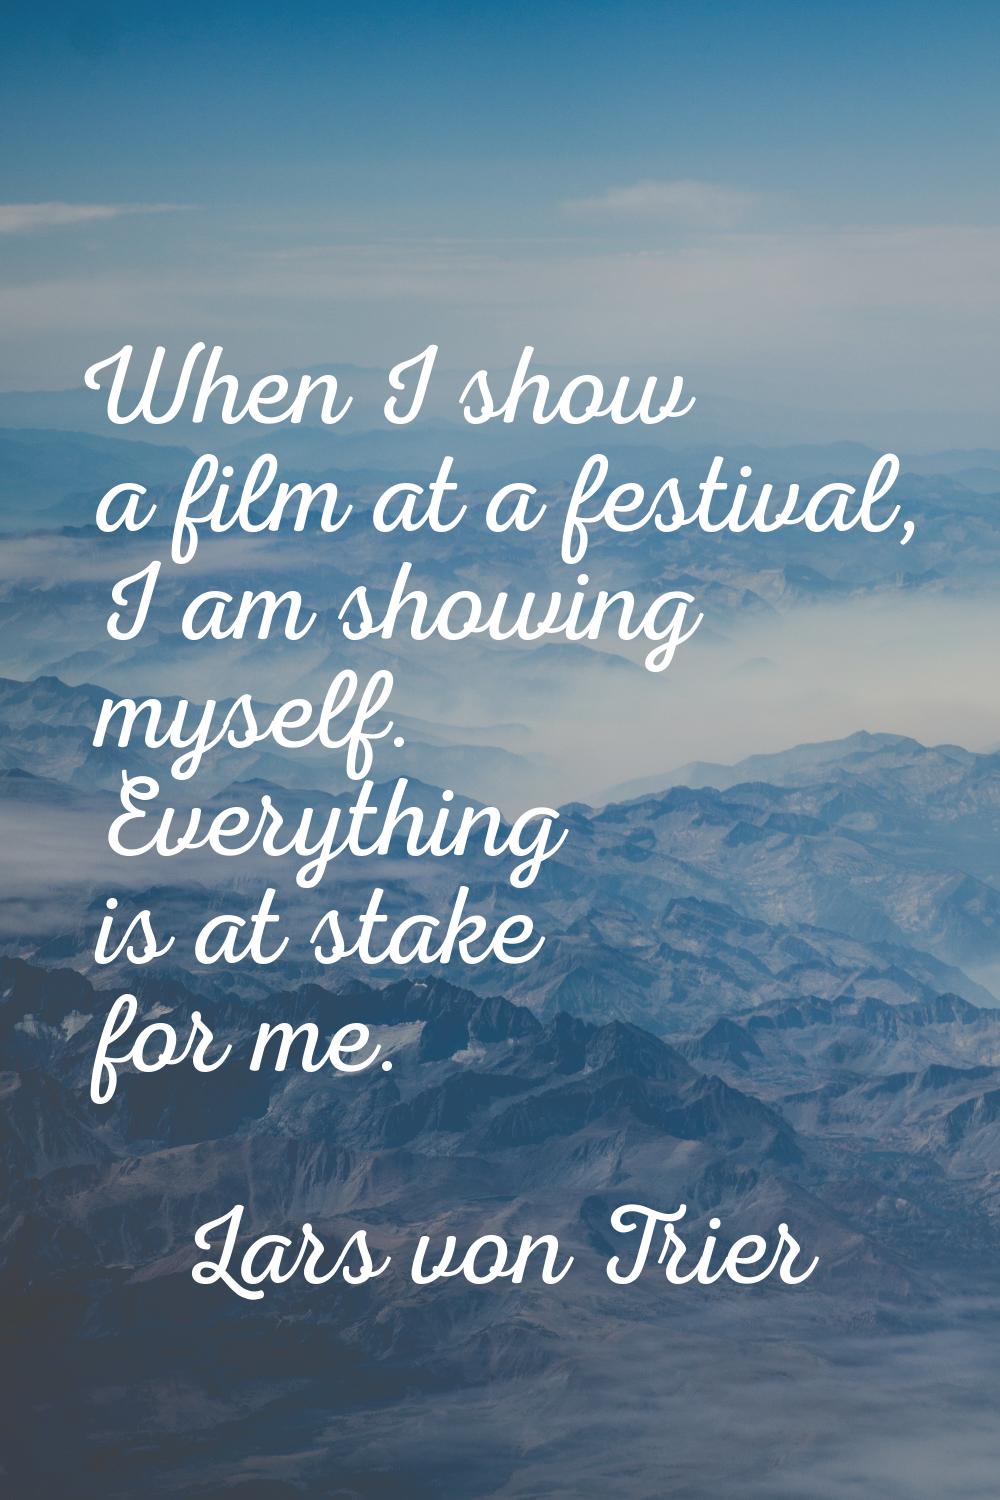 When I show a film at a festival, I am showing myself. Everything is at stake for me.